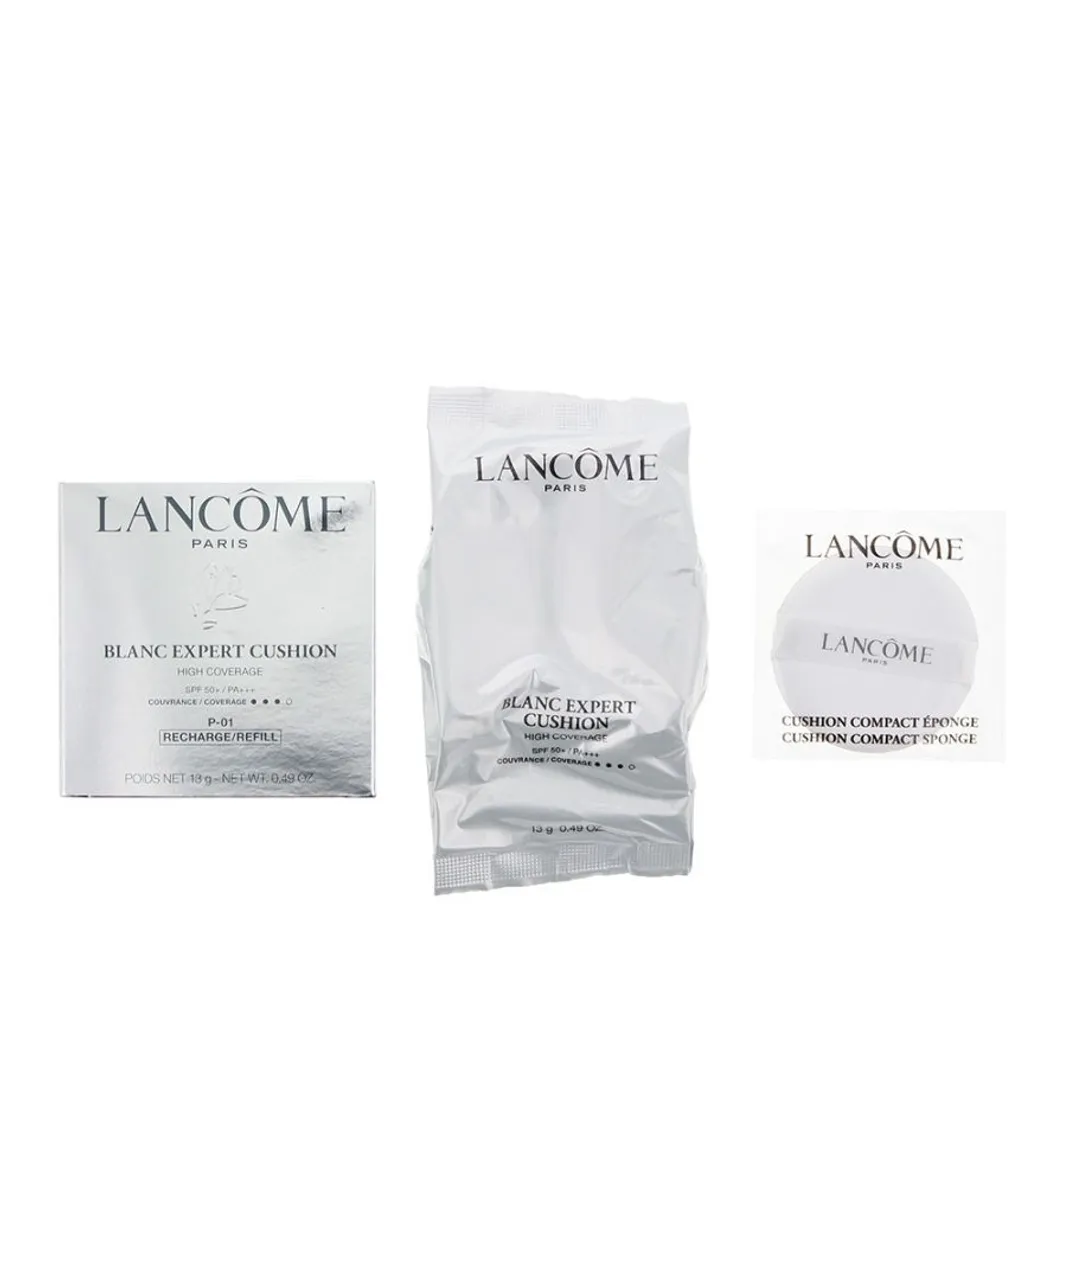 Lancome Blanc Expert Cushion Foundation 13g Refill - P-01 SPF 50 - NA - One Size